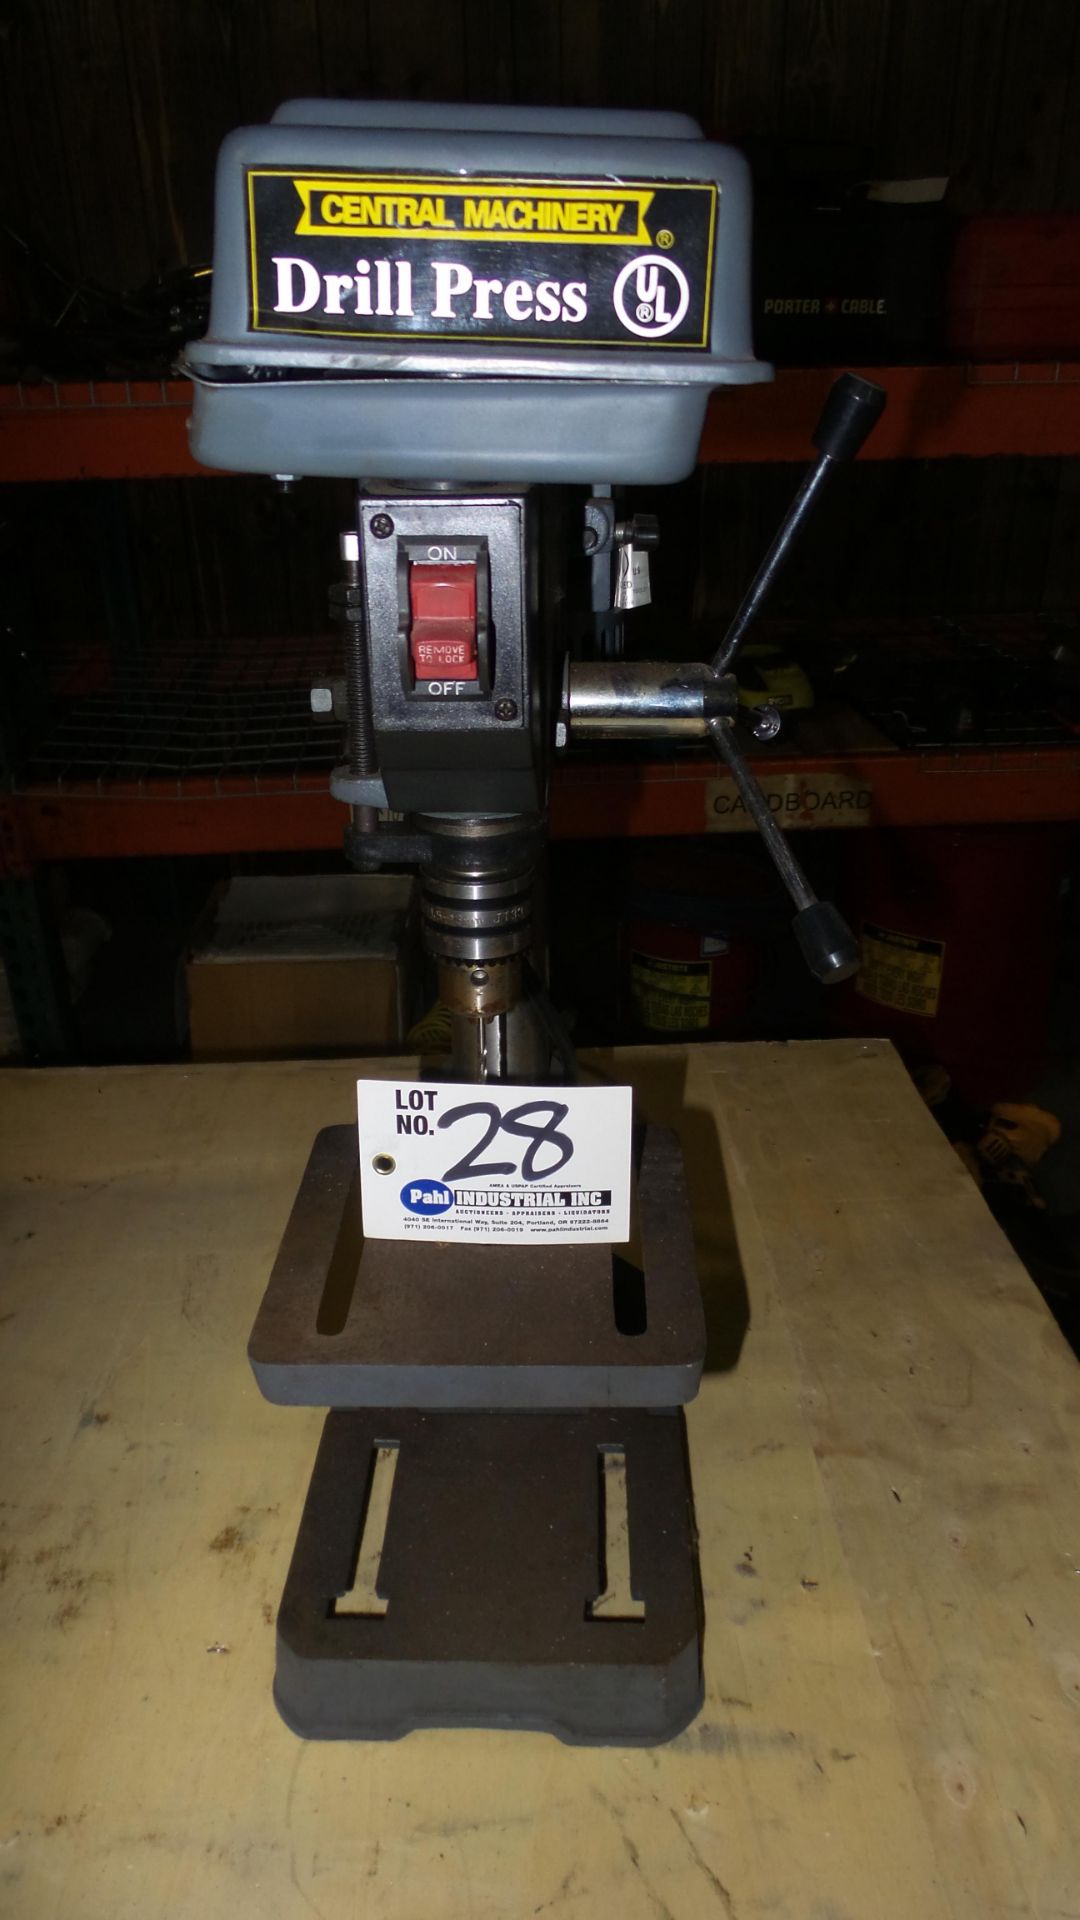 Central Machinery Model 813B Drill Press 6.5"" x 6.5"" Table